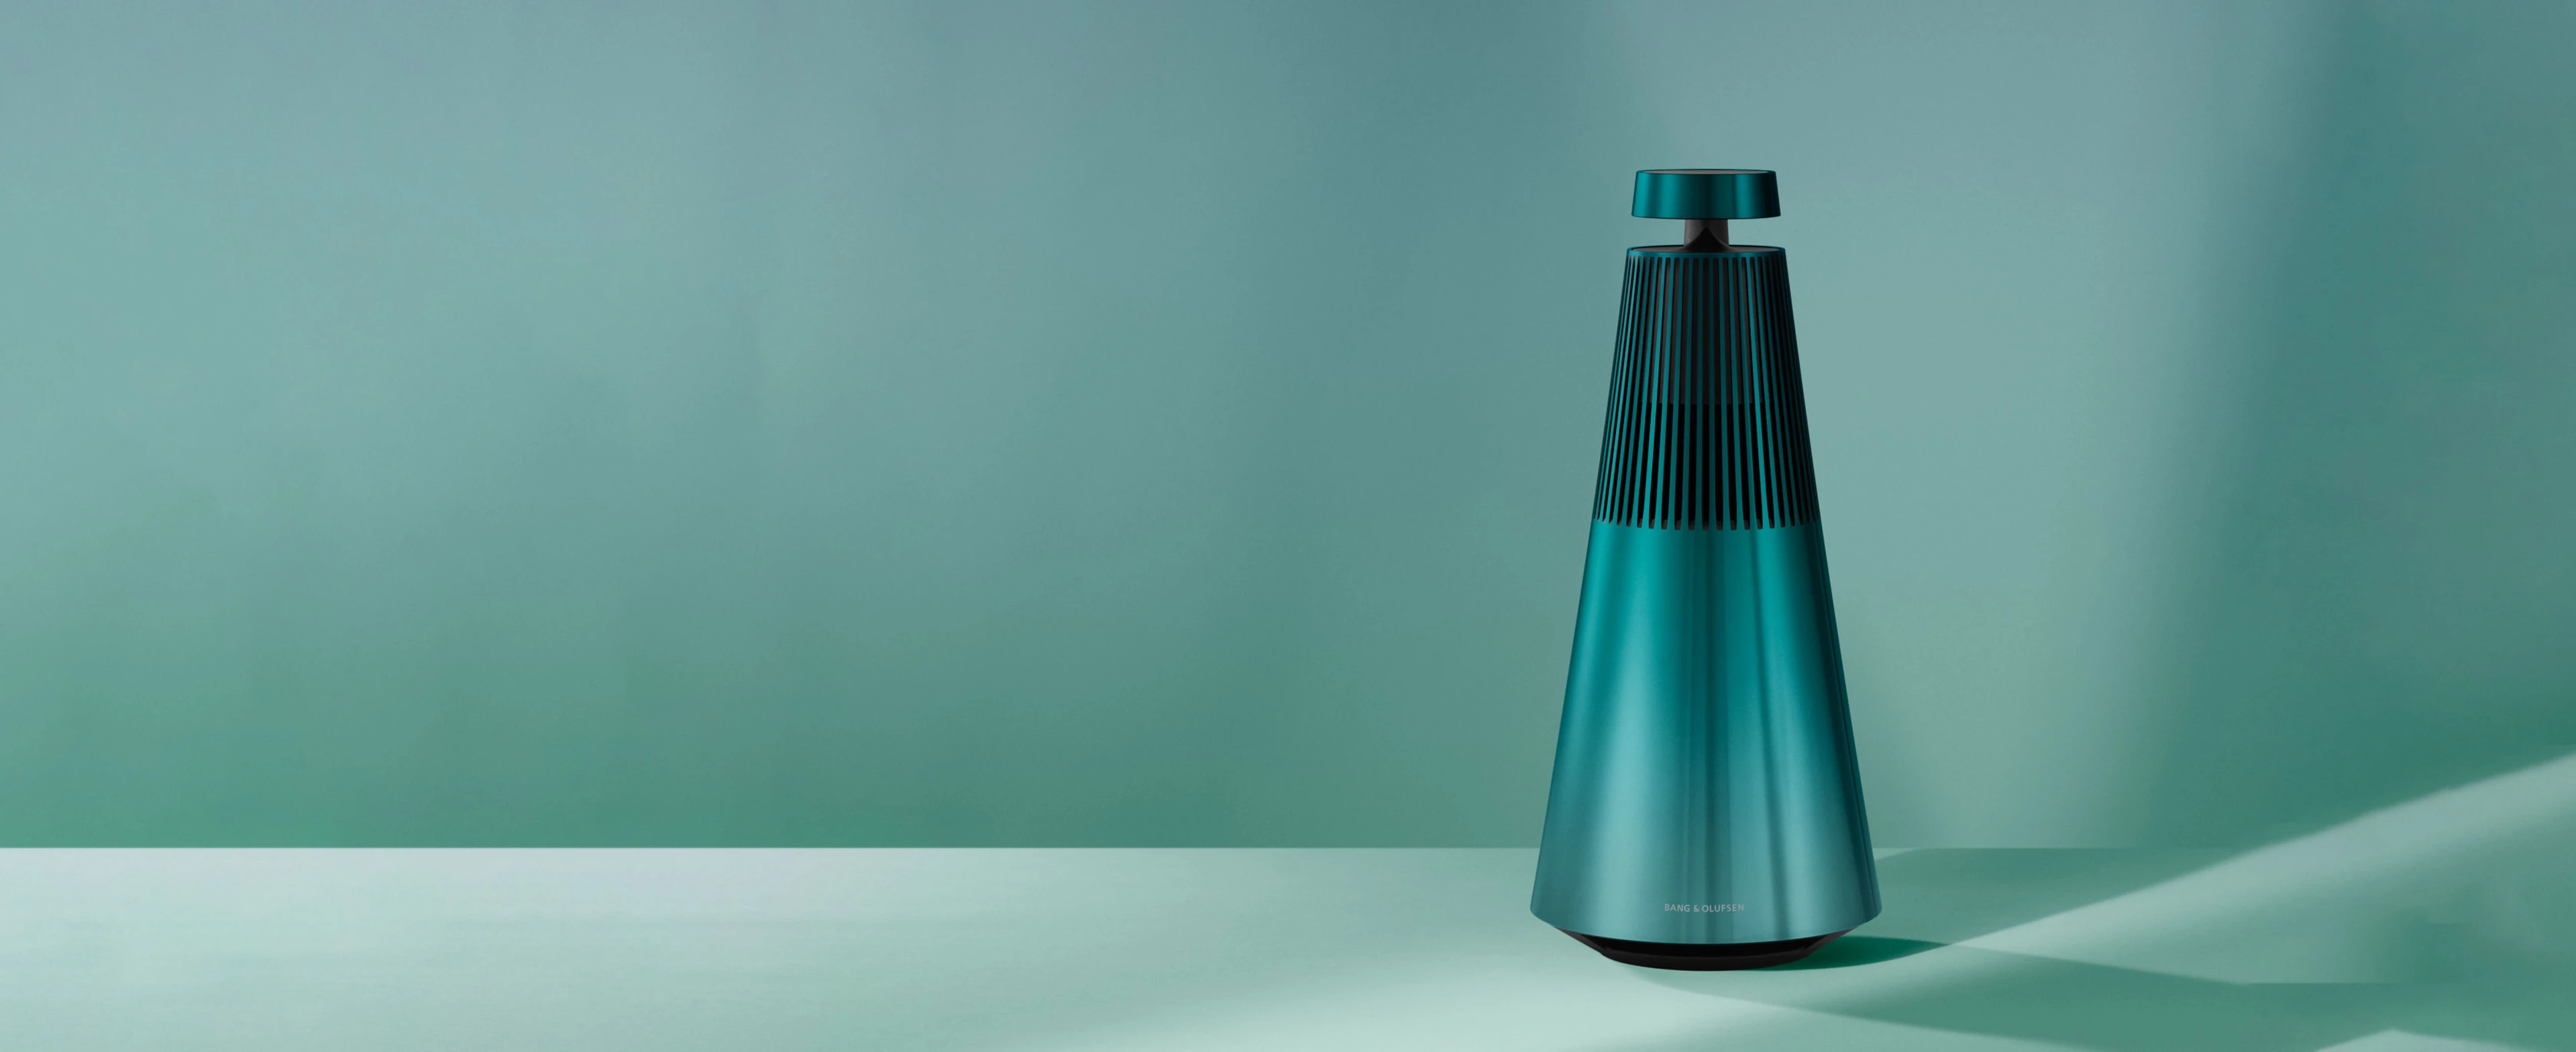 The Beosound 2 speaker in the limited Atelier colour Northern Sky Turquoise